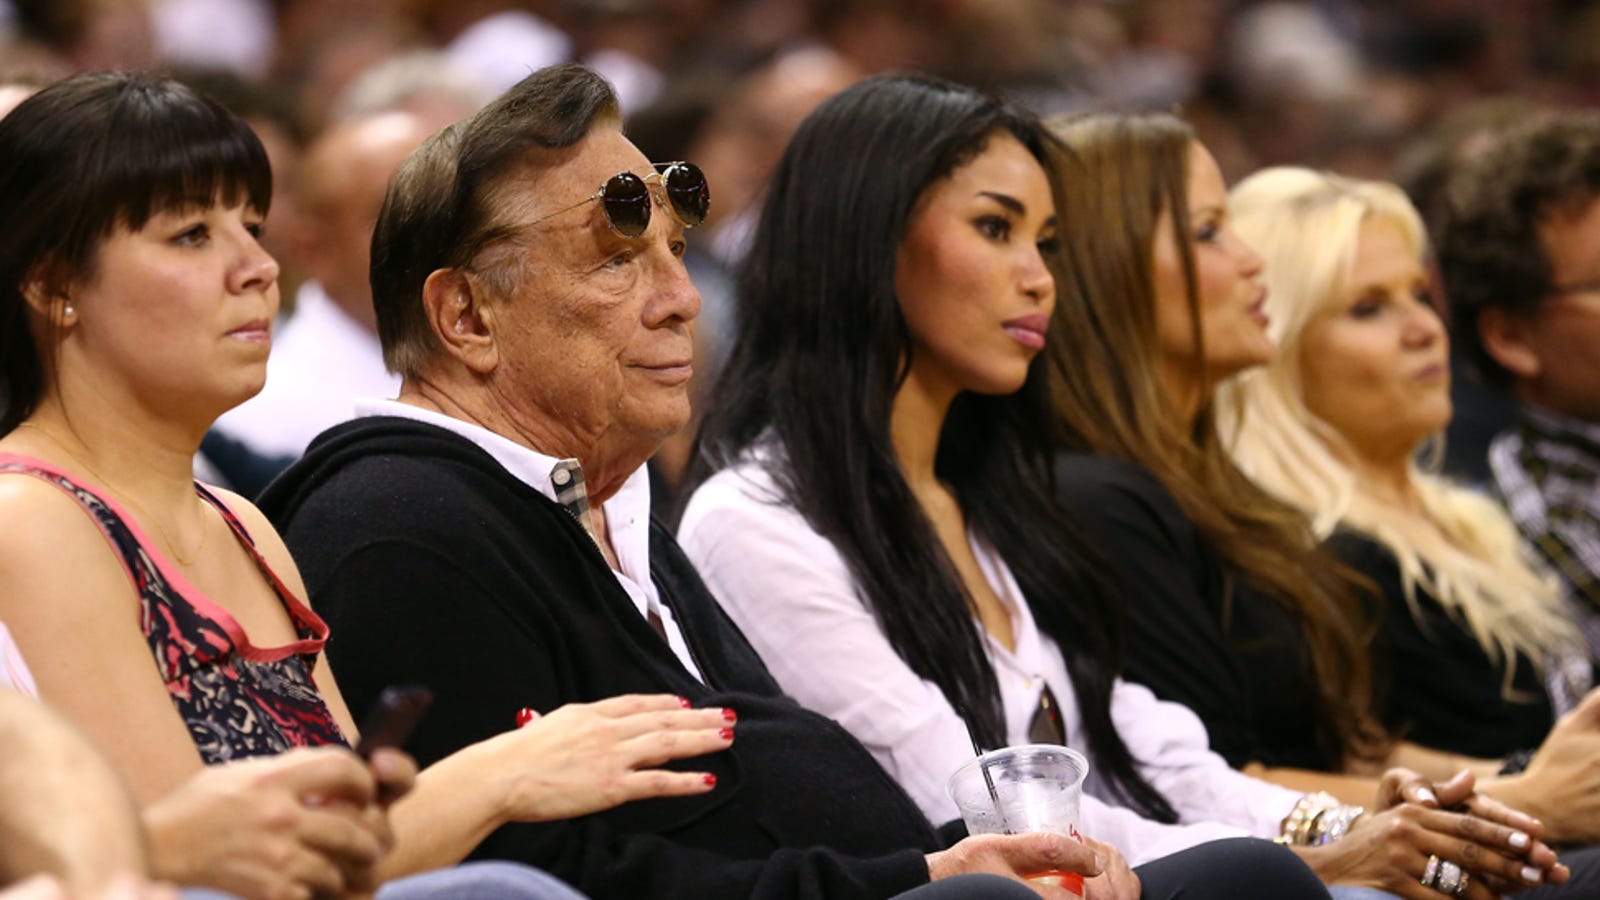 Shocker Racist La Clippers Owner Donald Sterling Is Also